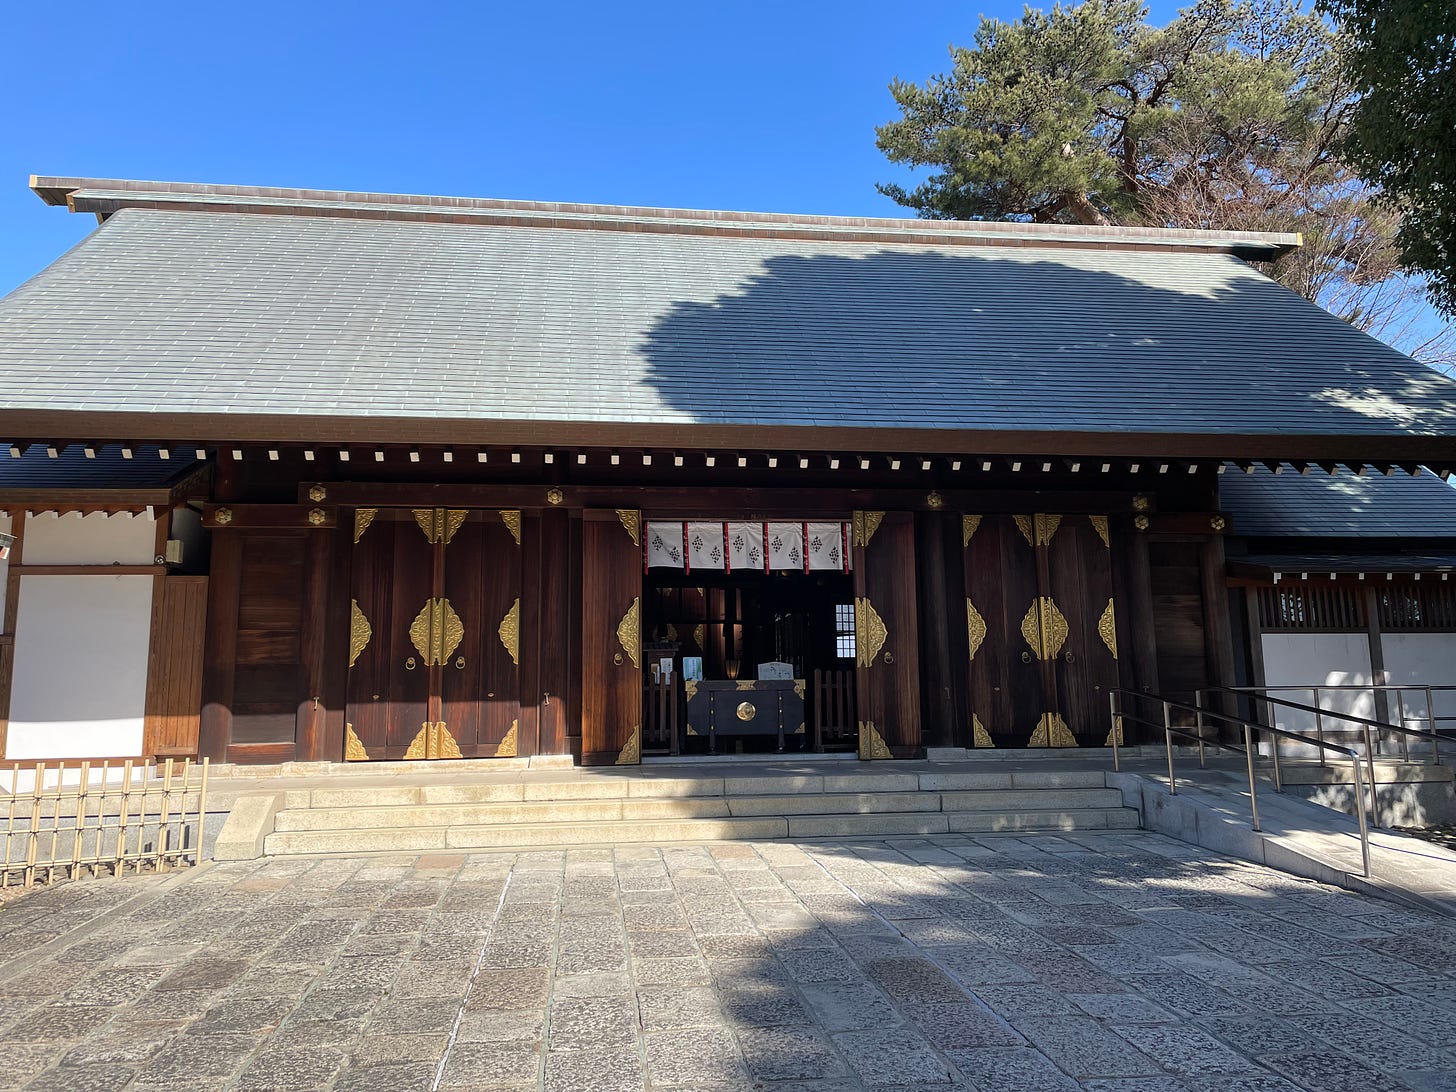 Main building of Shoin Shrine. Dark wood panels with golden trim on the outside. A sweeping roof. A red, white, and black noren curtain hangs over the door that houses the offering box and inner shrine elements.